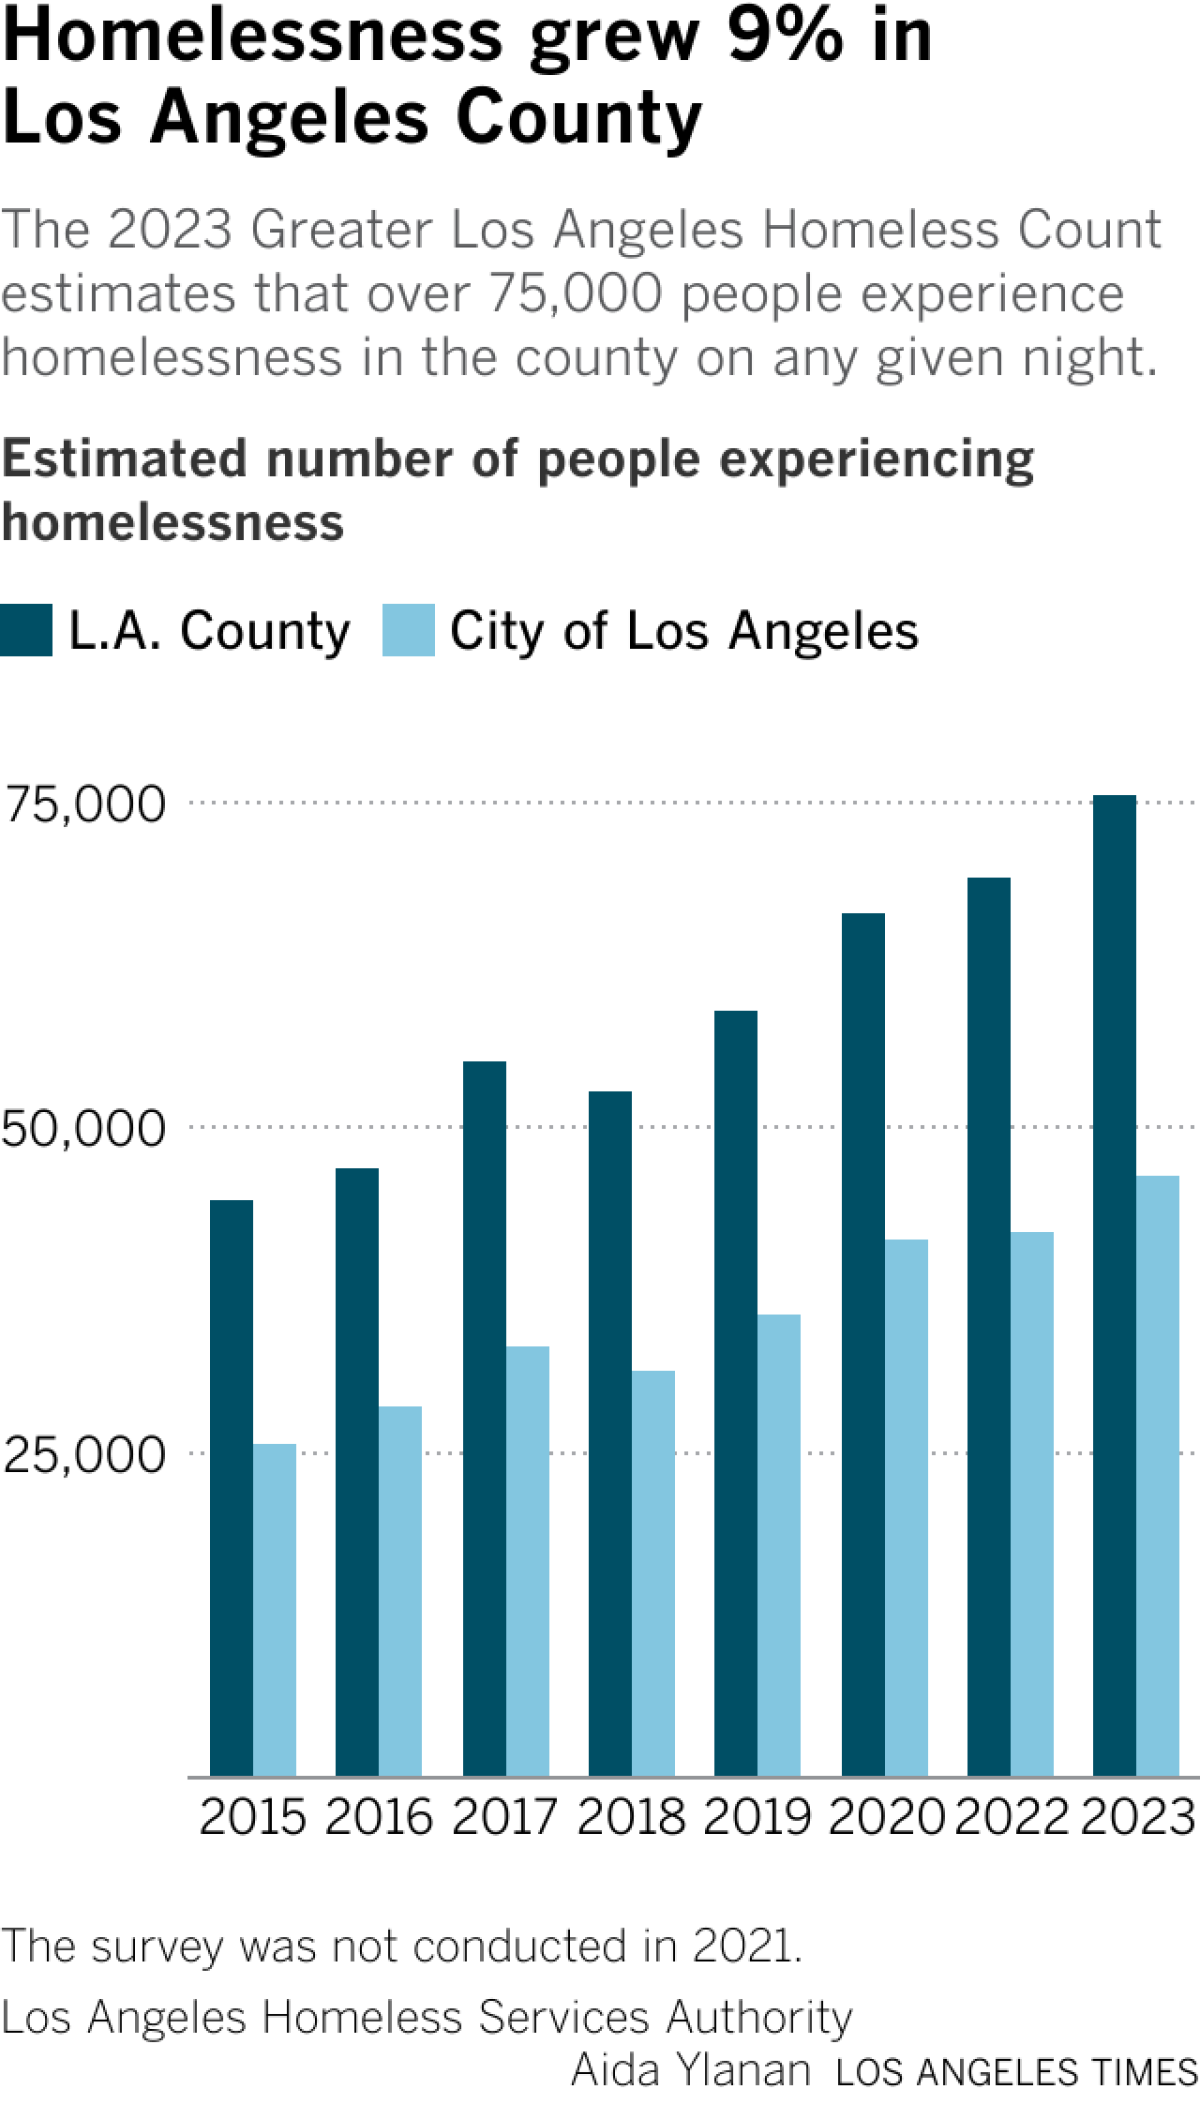 The 2023 Greater Los Angeles Homeless Count estimates that over 75,000 people experience homelessness in the county on any given night.